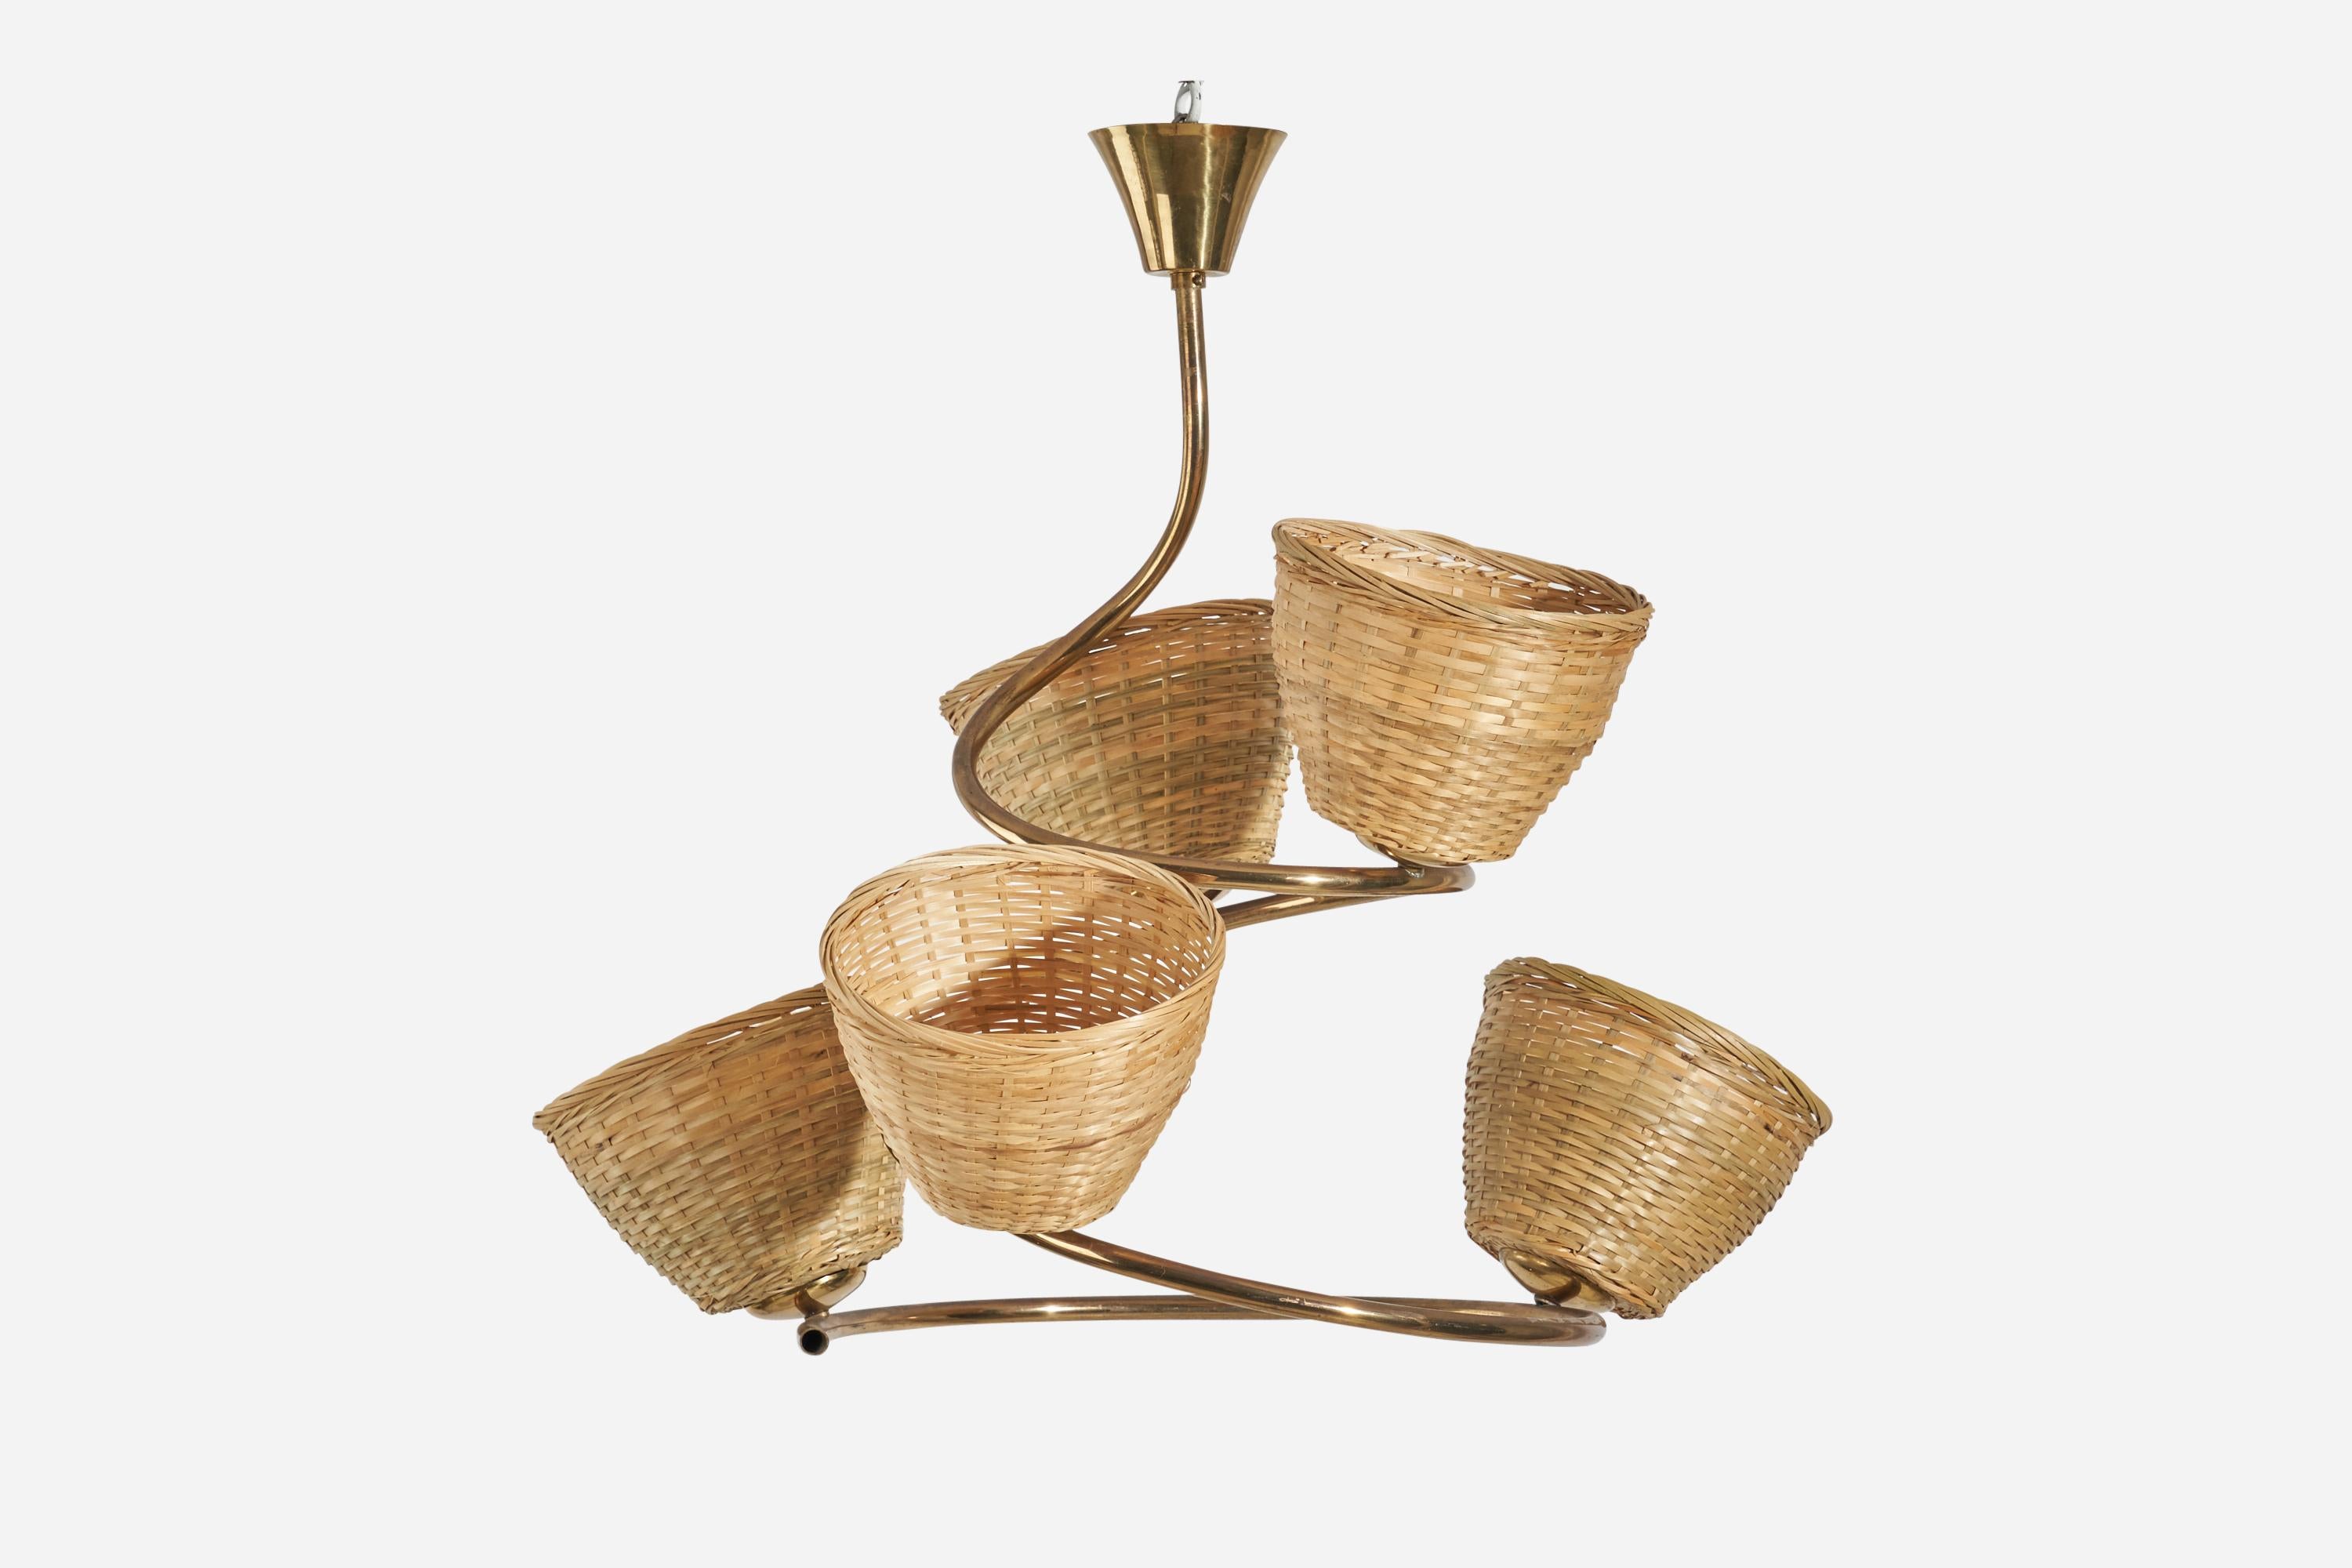 A brass and rattan chandelier designed and produced by a Swedish designer, Sweden, 1950s.

Dimensions of canopy (inches) : 2.6 x 3.7 x 3.7 (height x width x depth)

Sockets take standard E-26 medium base bulb.

There is no maximum wattage